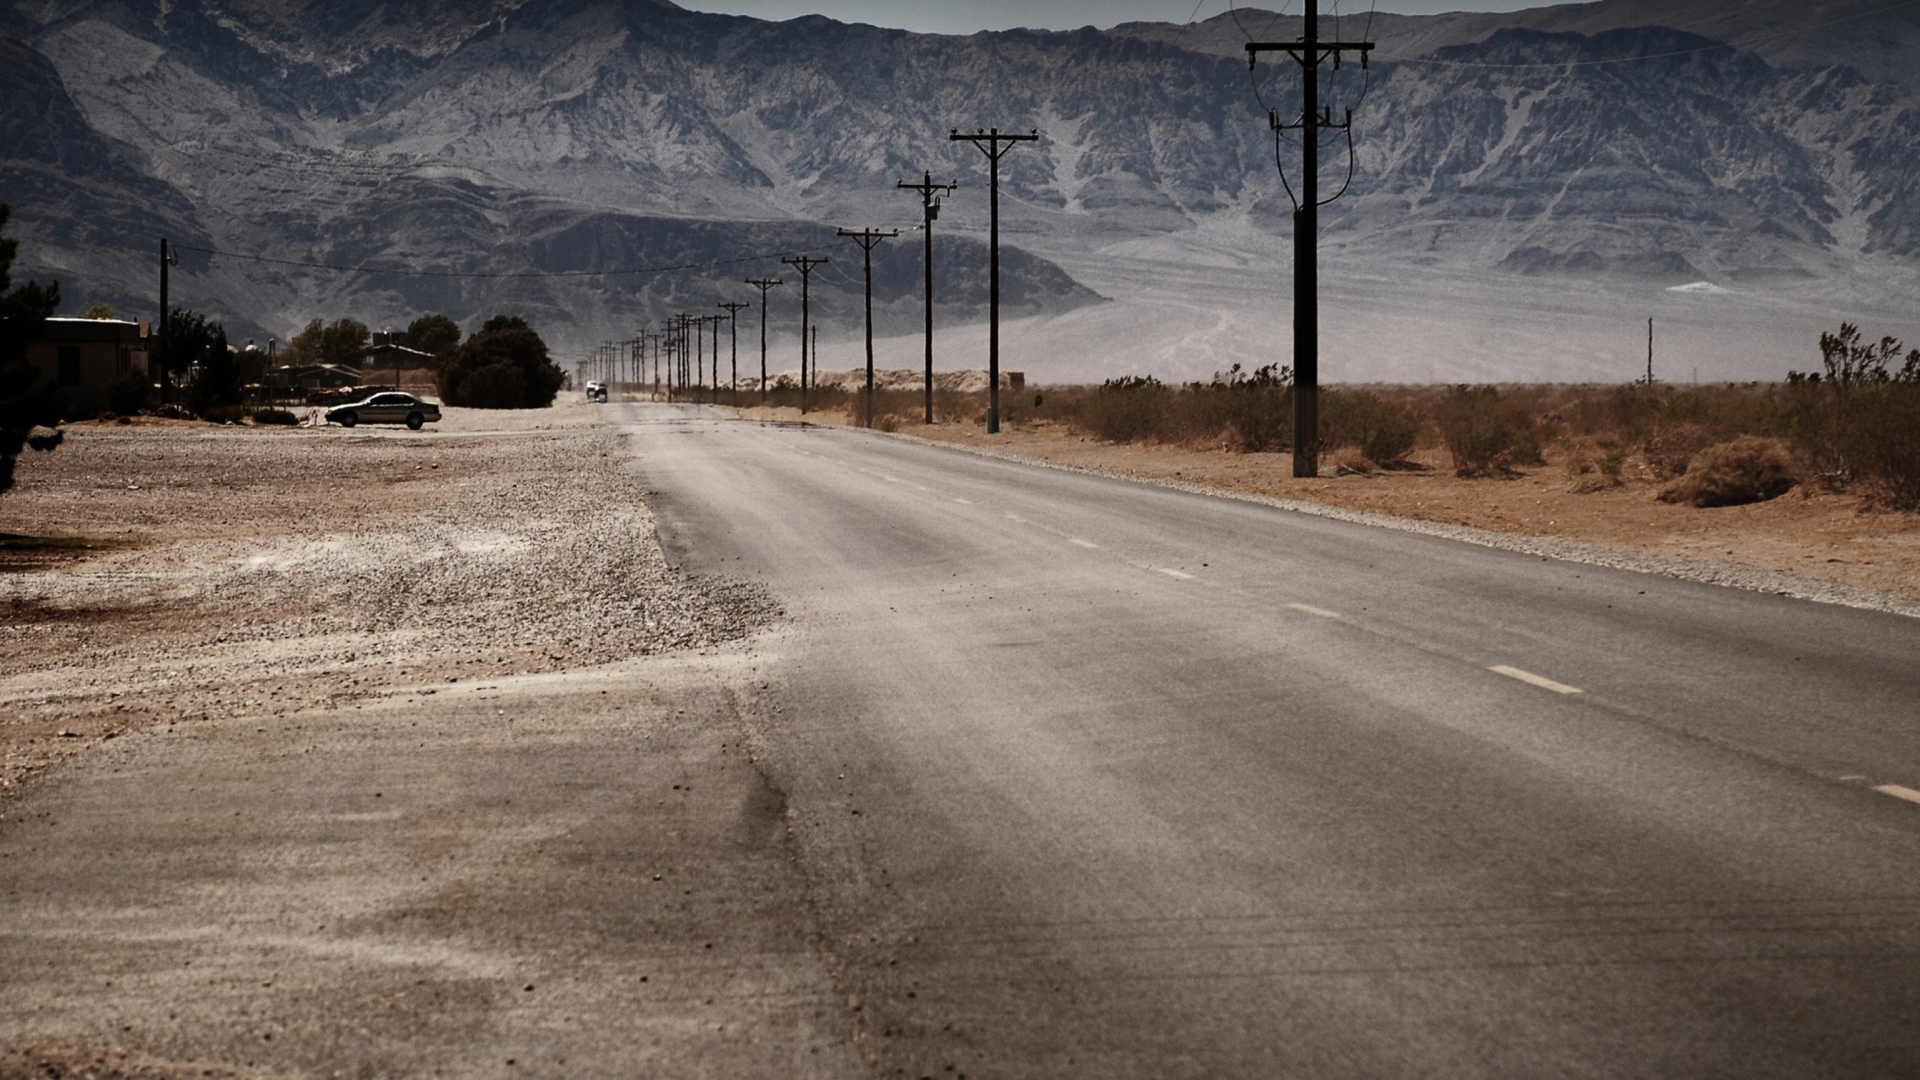 Desert Road And Mountains wallpaper 1920x1080